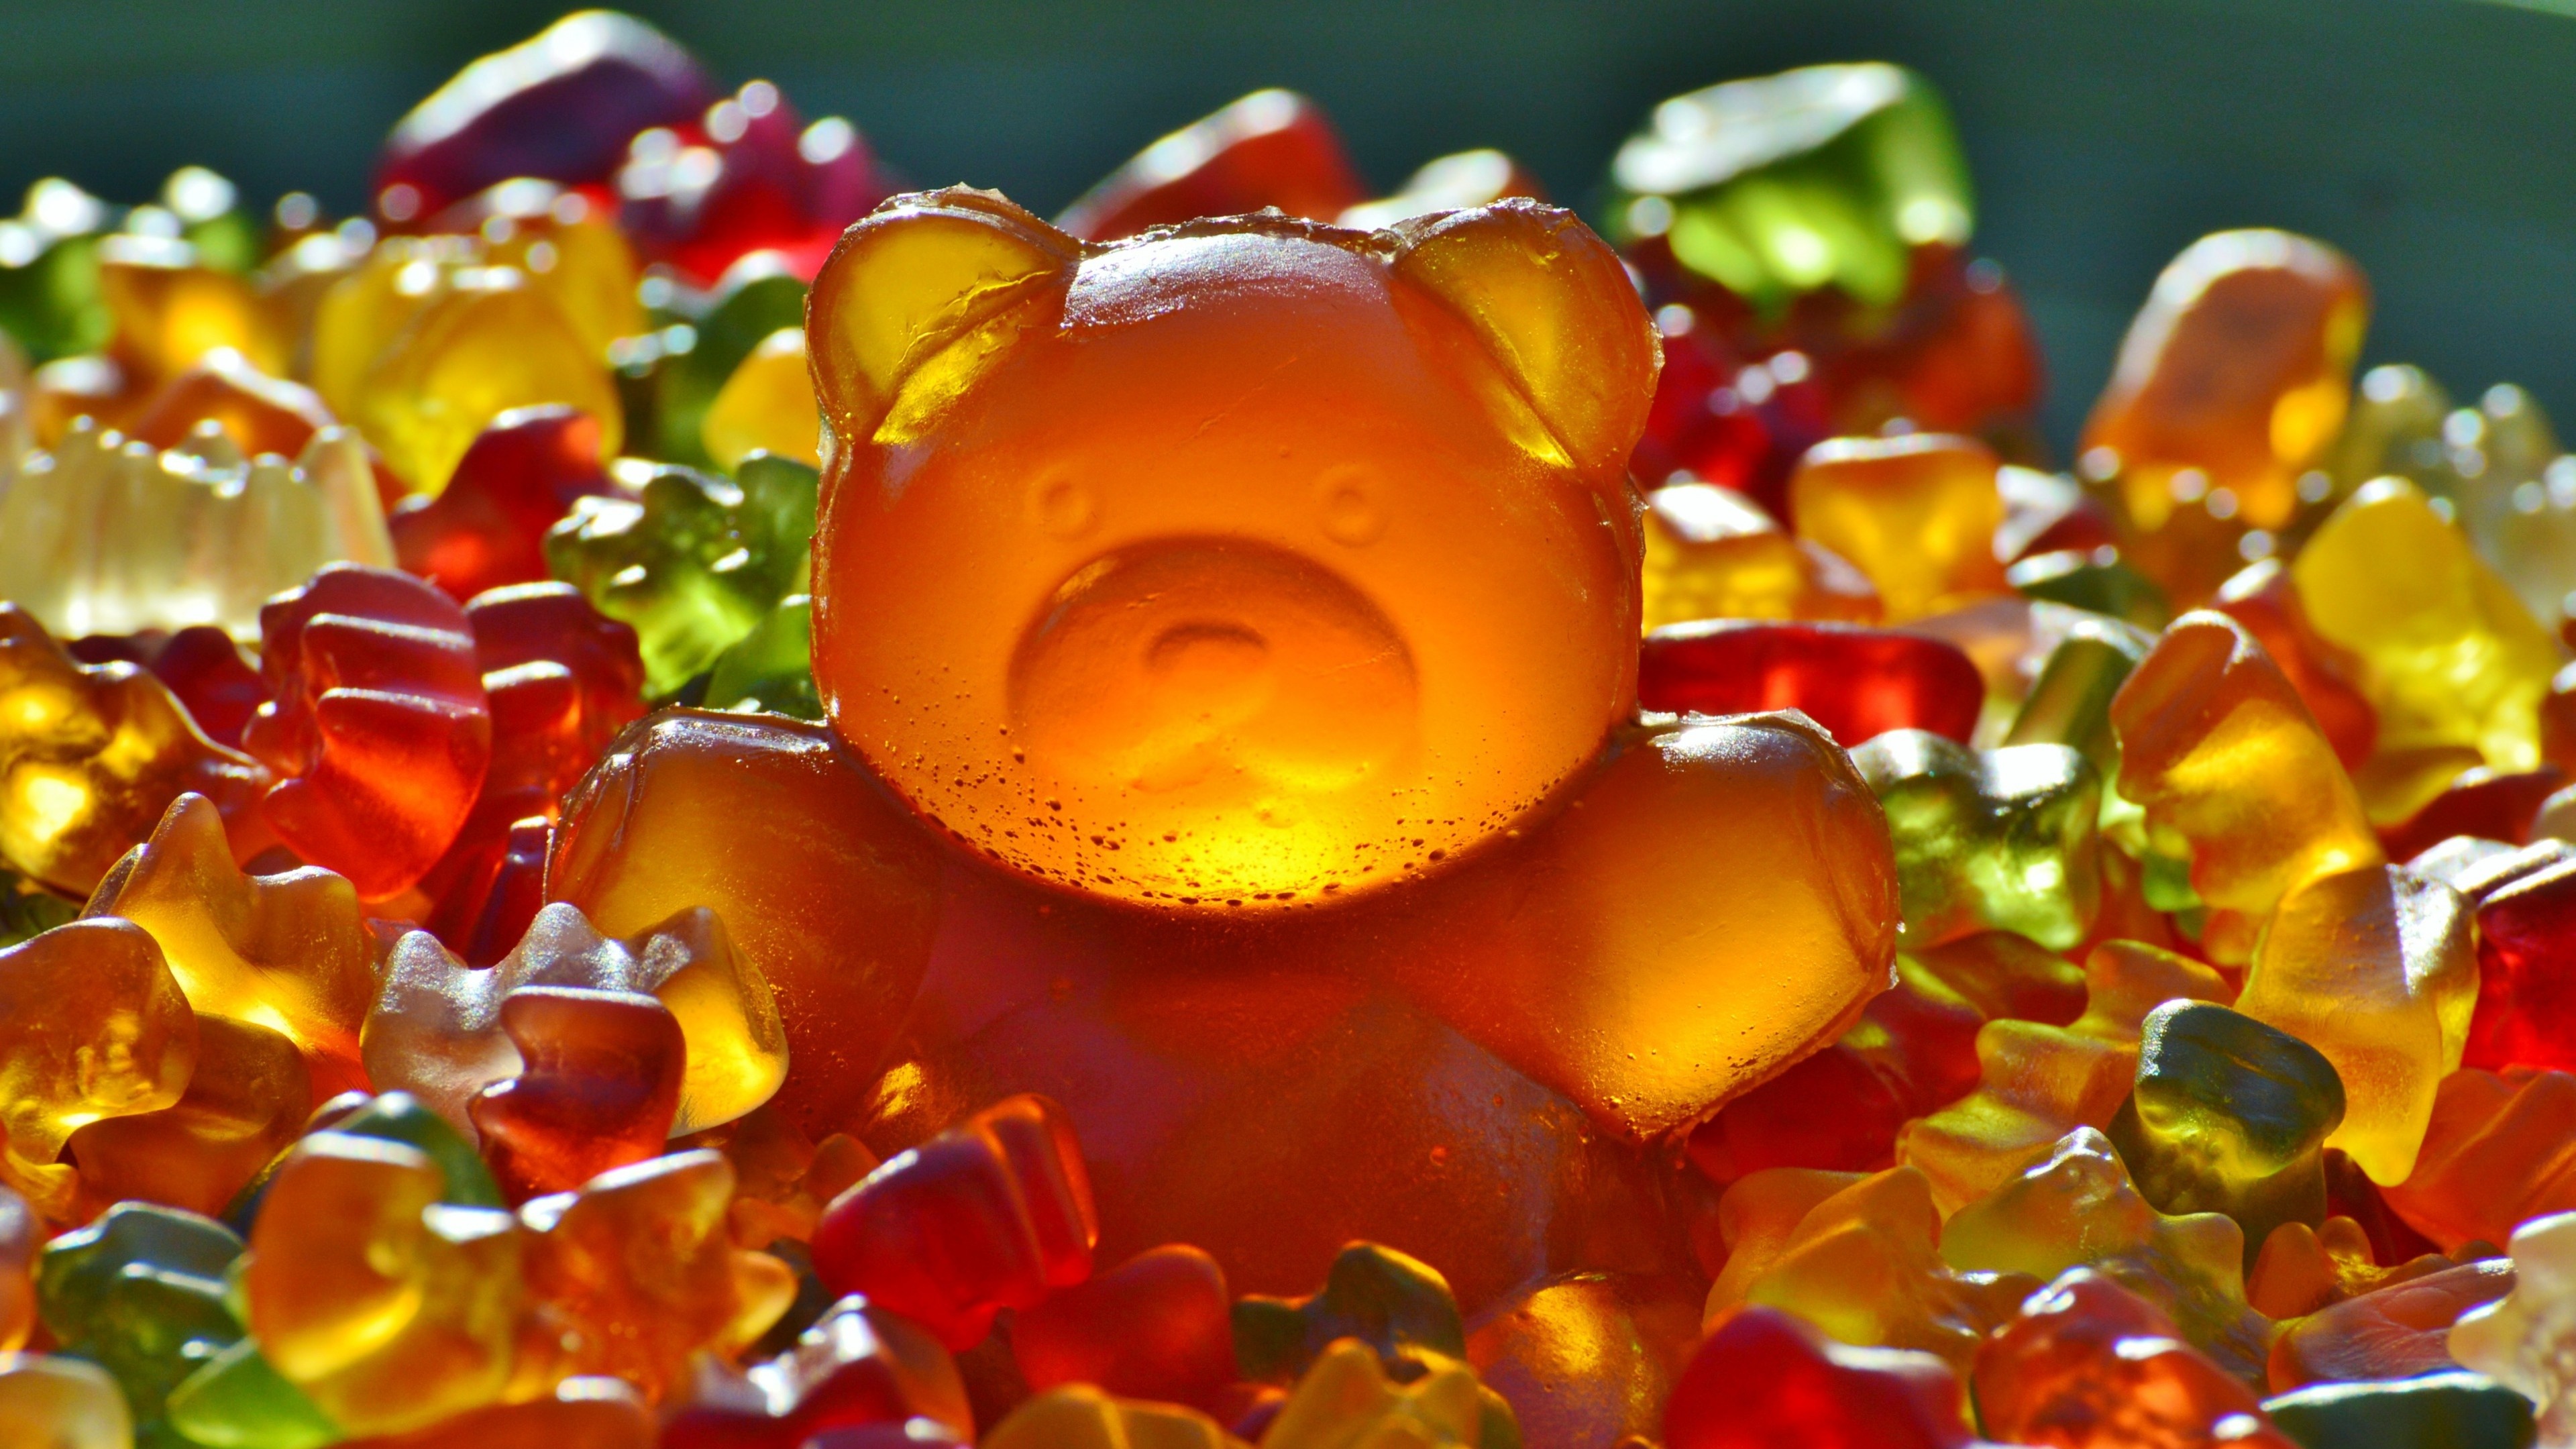 Gummy Bears, Colorful close-up, Glowing candies, Whimsical background, 3840x2160 4K Desktop